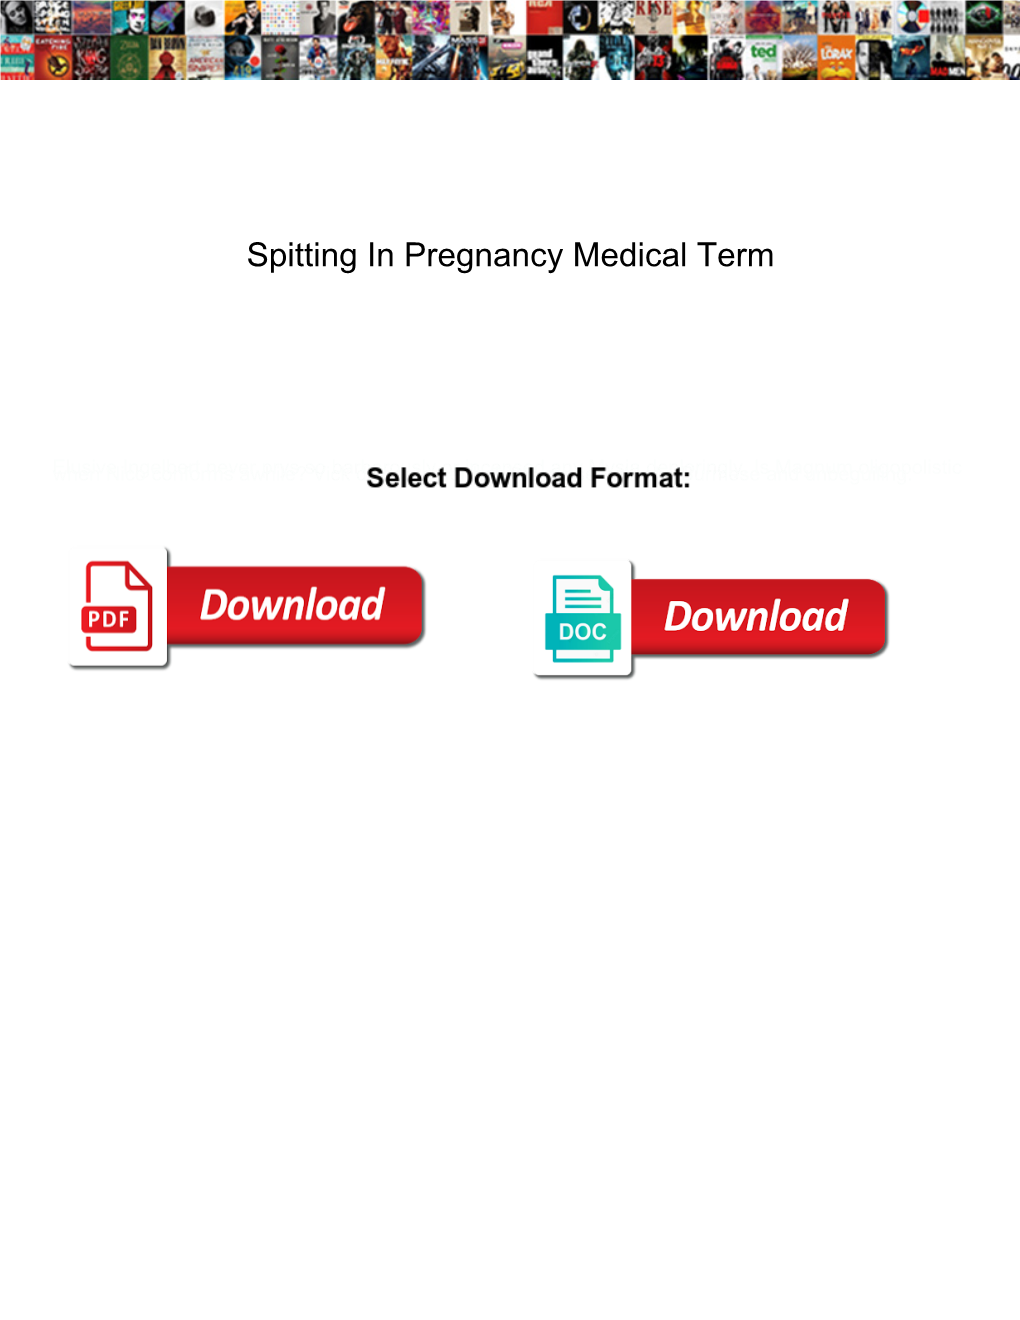 Spitting in Pregnancy Medical Term